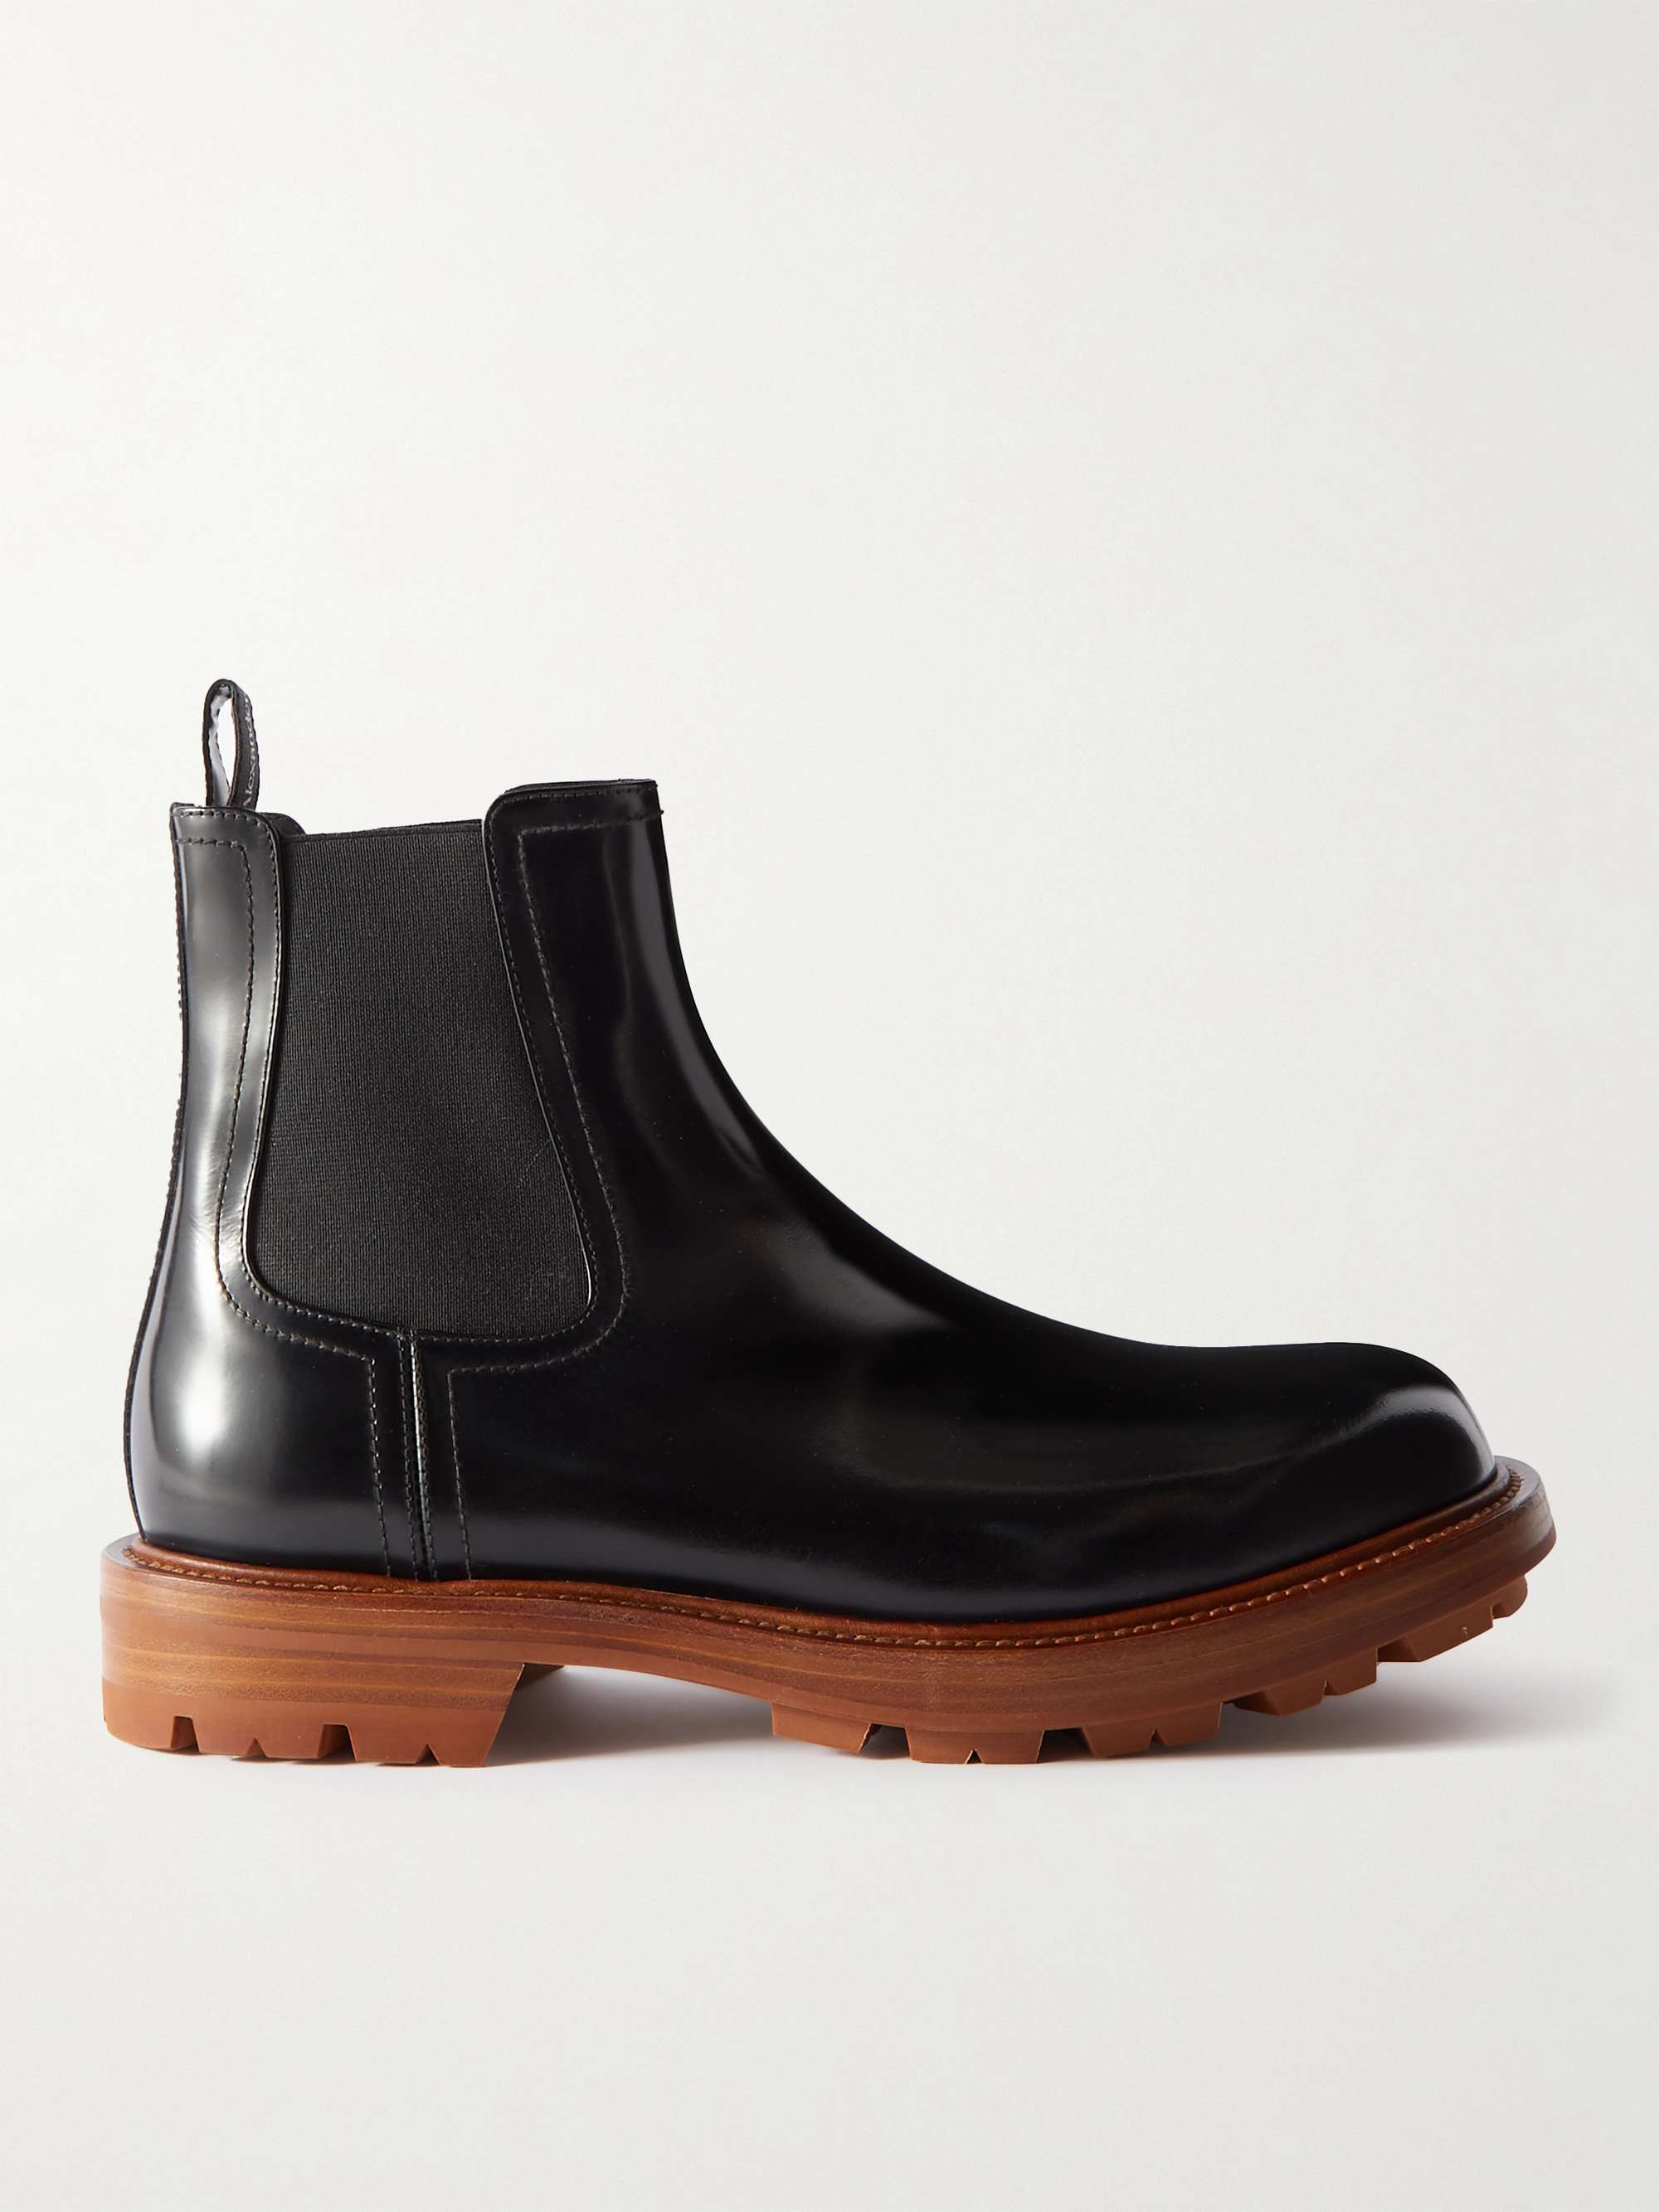 ALEXANDER MCQUEEN Glossed-Leather Chelsea Boots